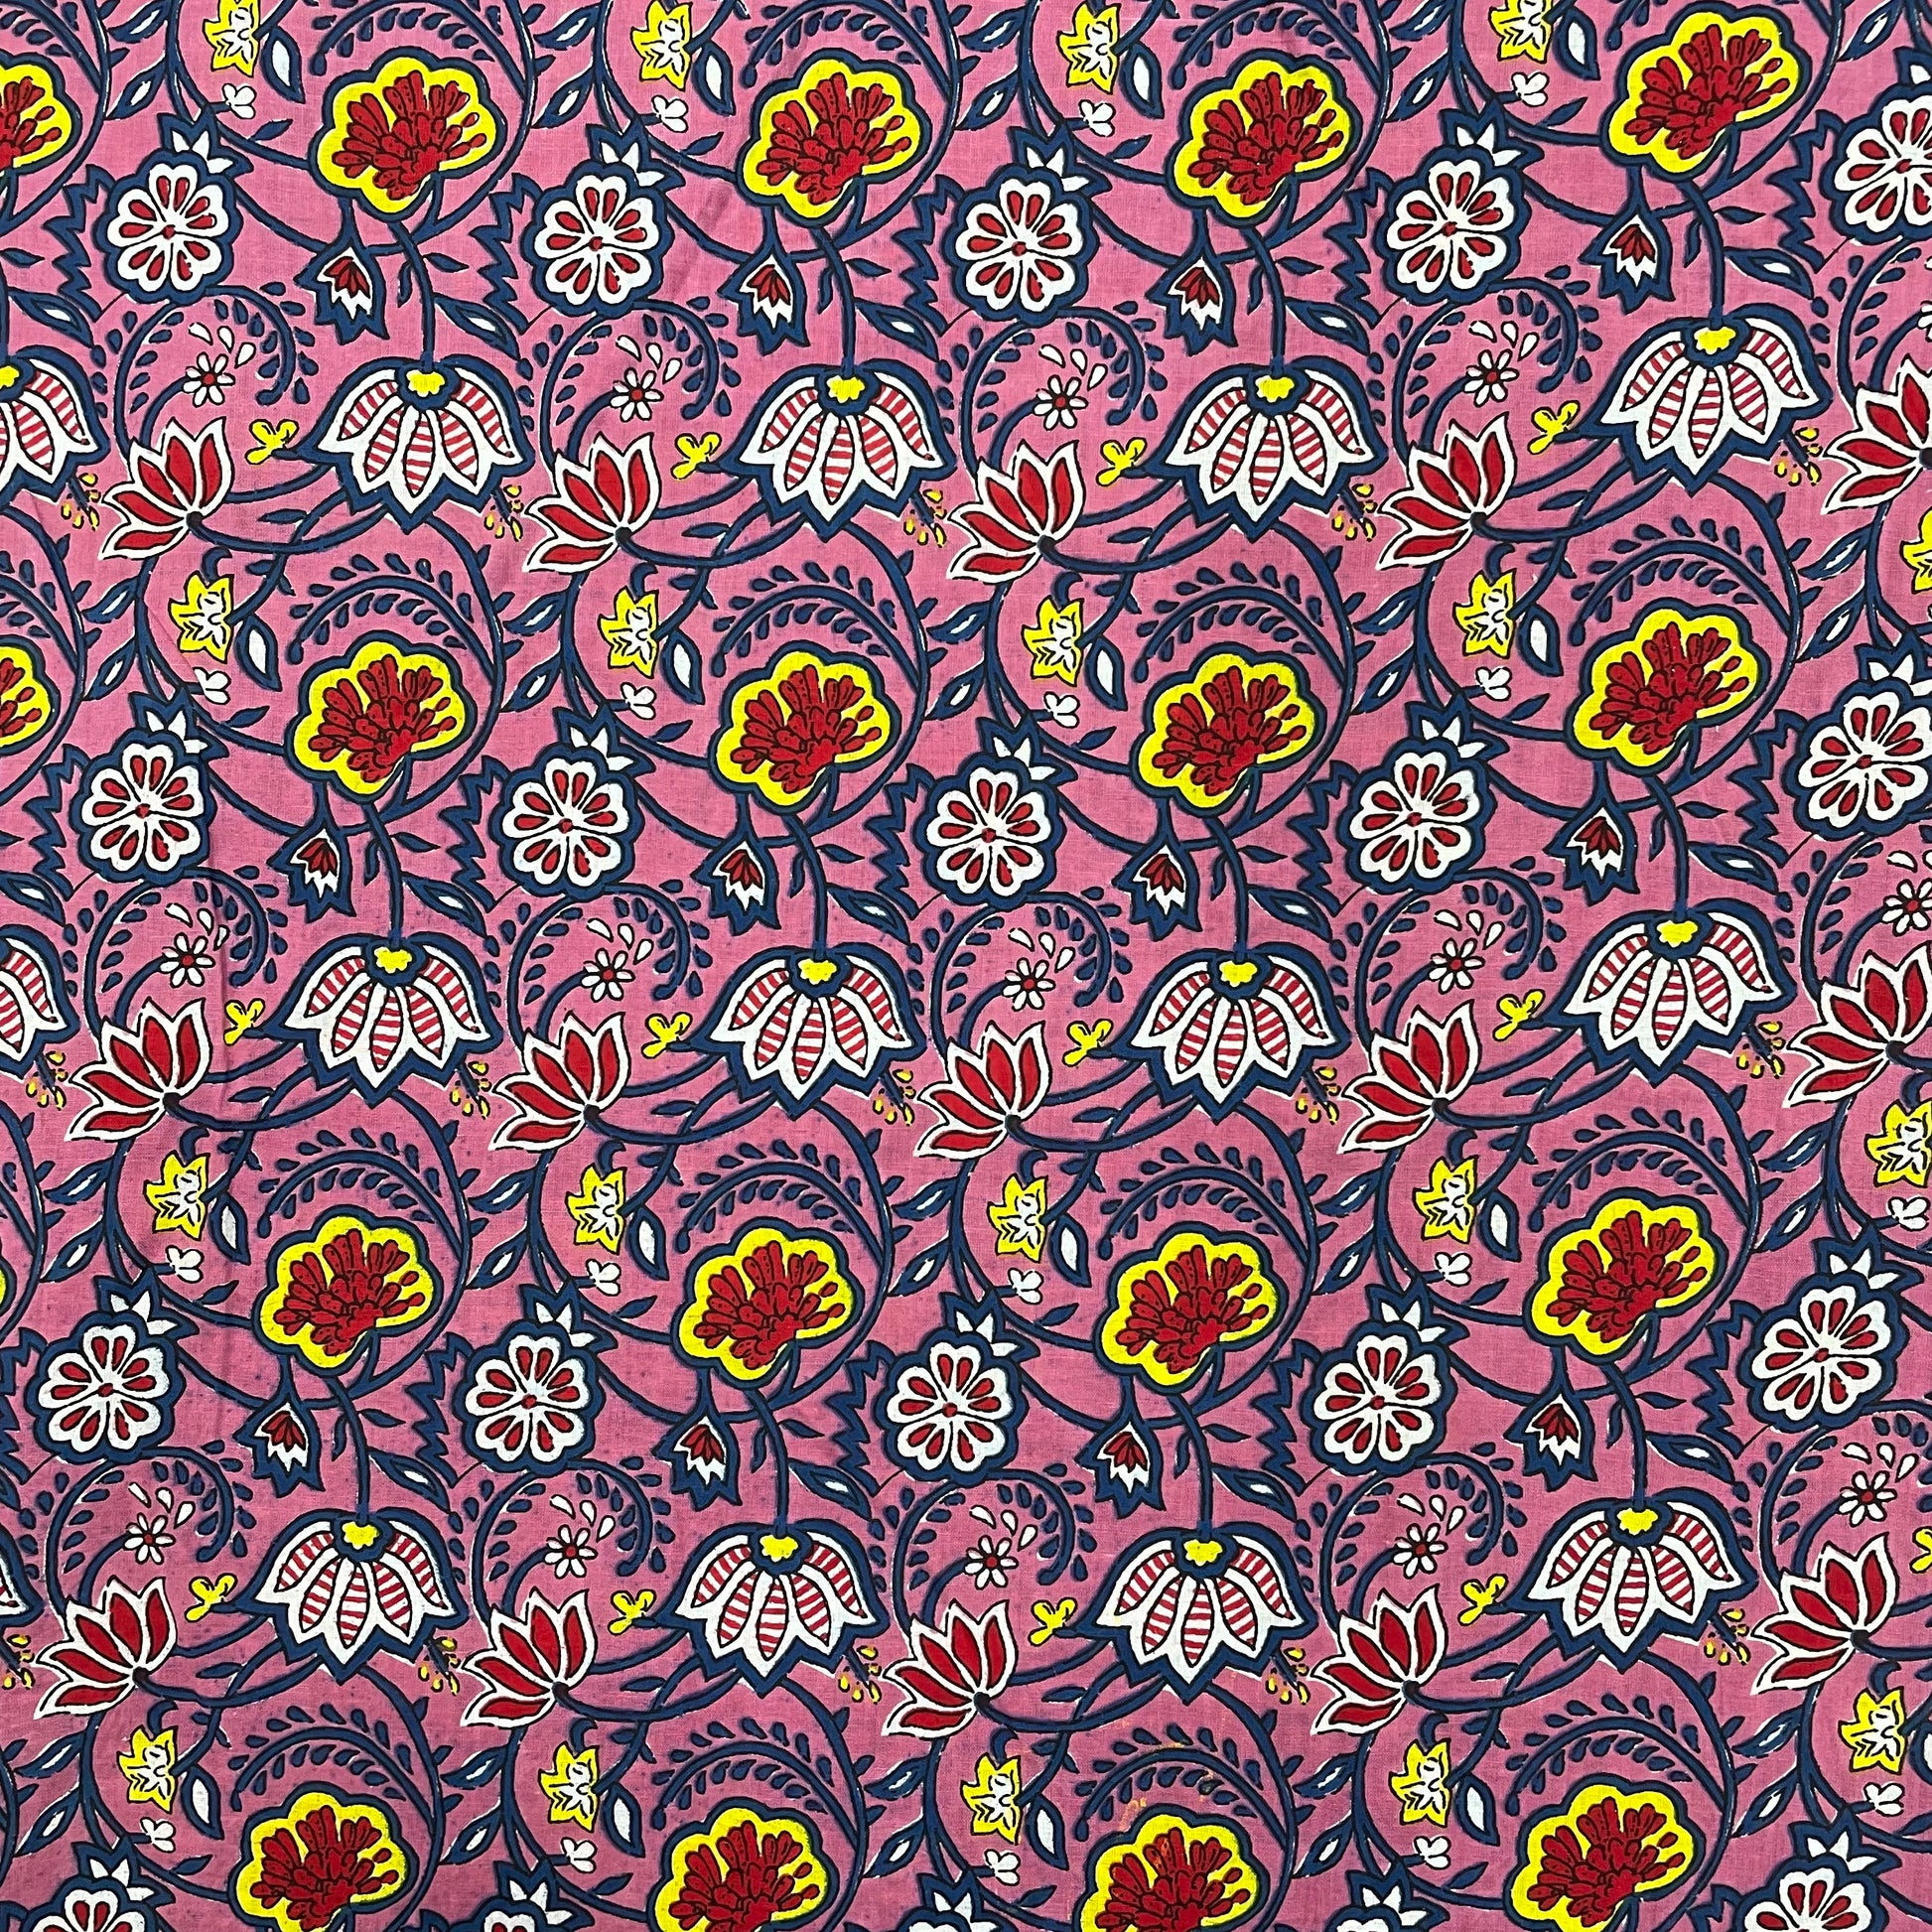 Pink With Yellow Floral Print Cotton Fabric - TradeUNO